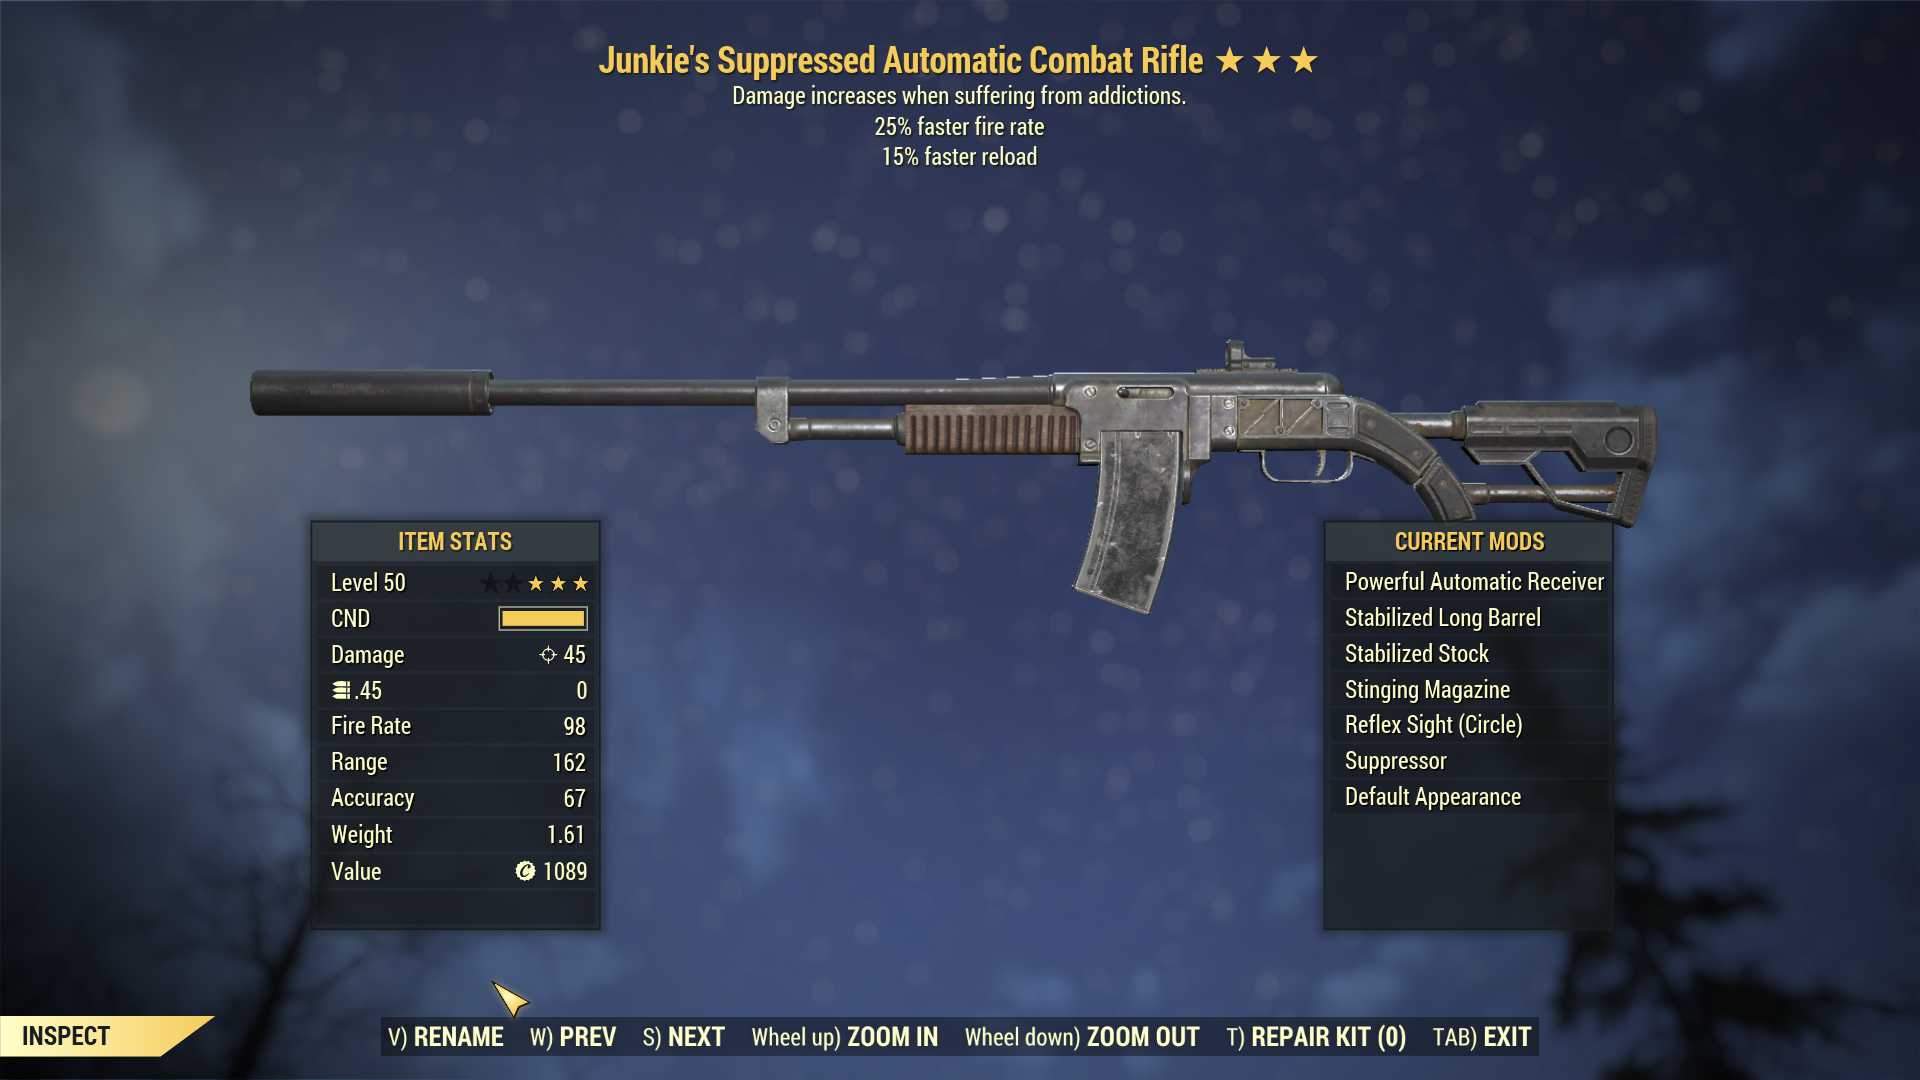 Junkie's Combat Rifle (25% faster fire rate, 15% faster reload)